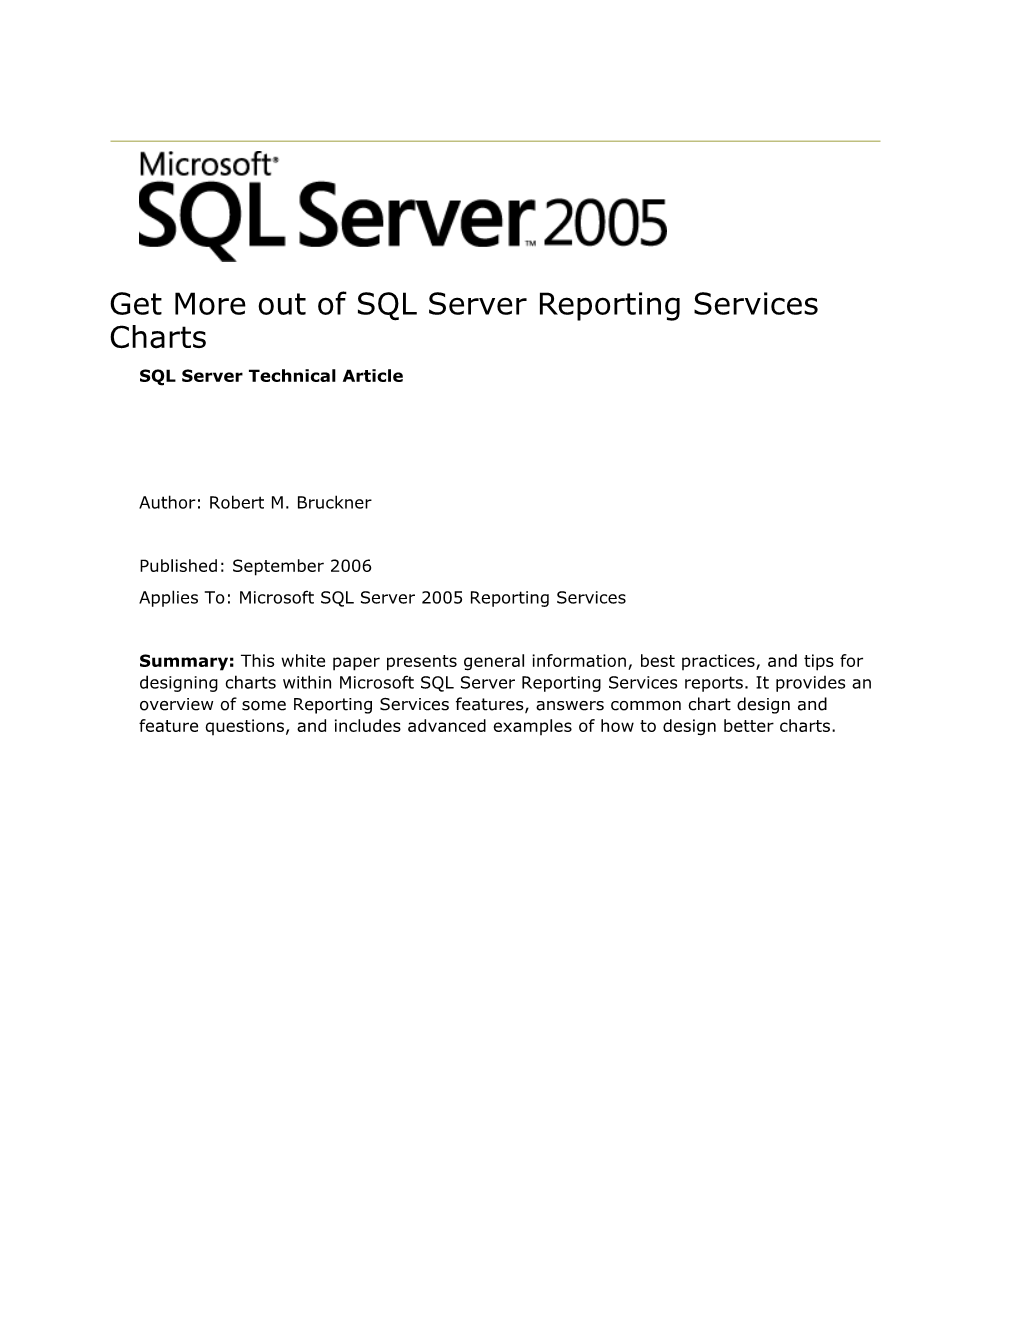 Get More out of SQL Server Reporting Services Charts